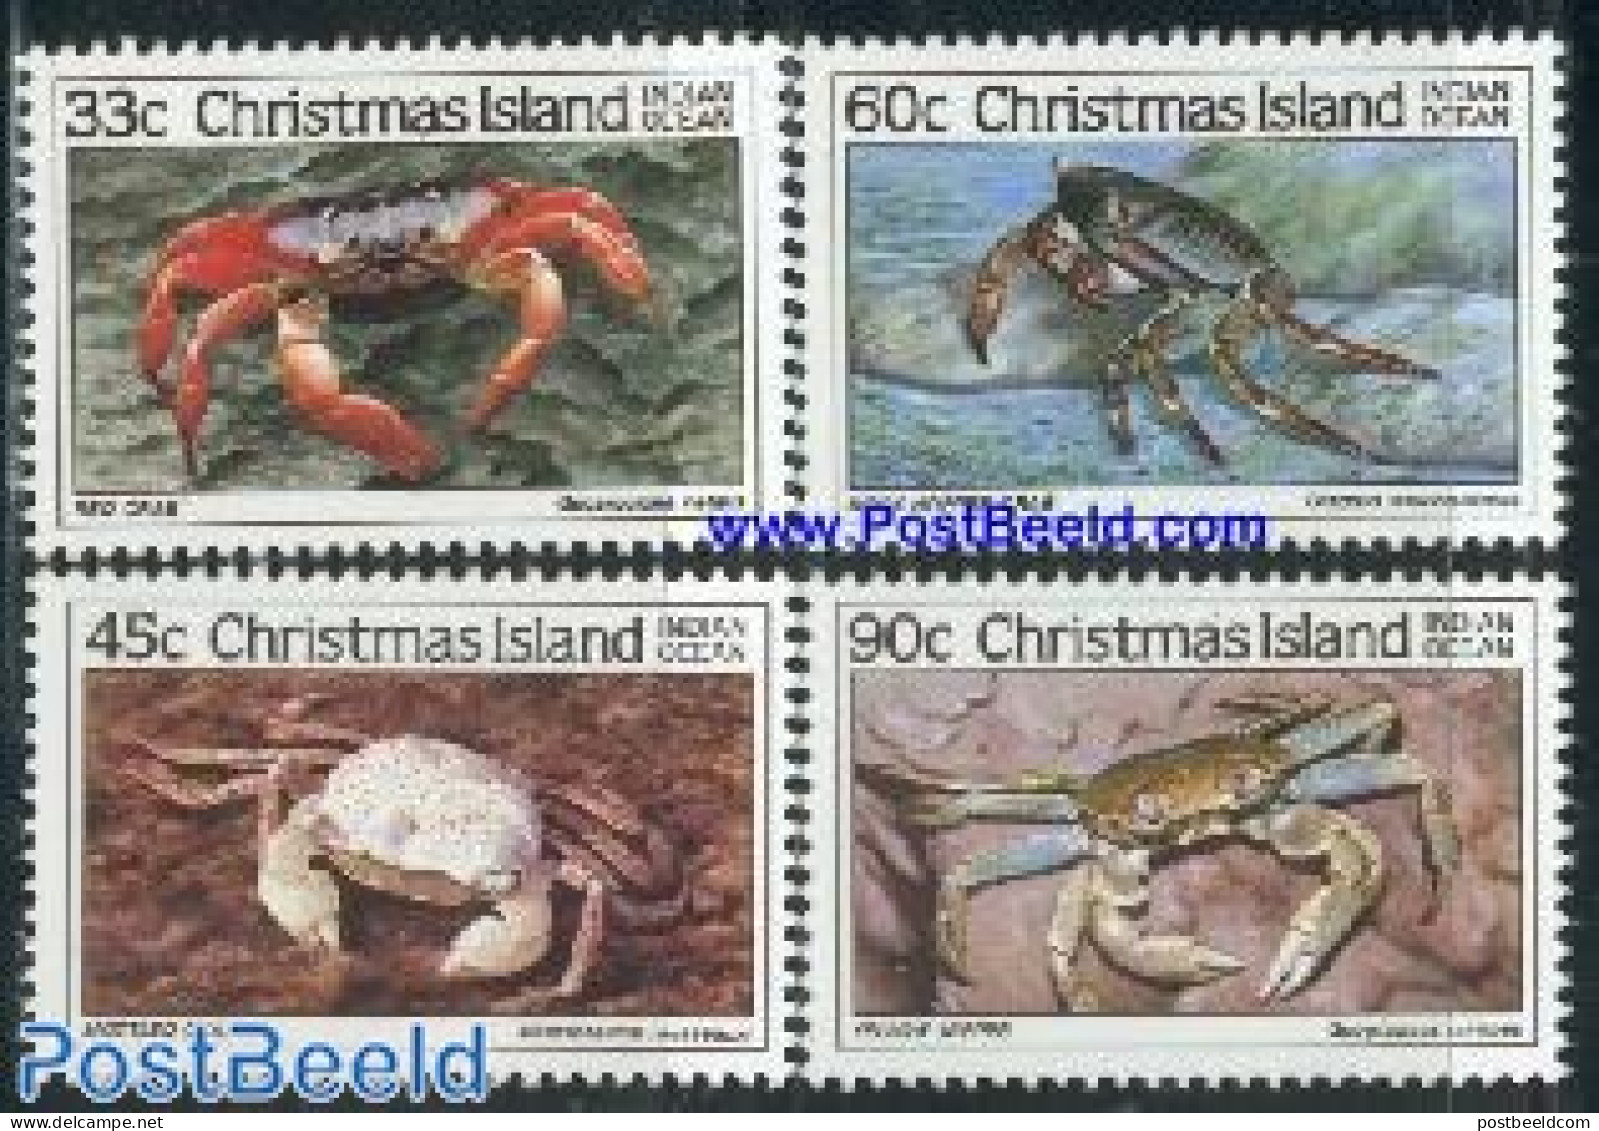 Christmas Islands 1985 Crabs 4v, Mint NH, Nature - Shells & Crustaceans - Crabs And Lobsters - Vie Marine